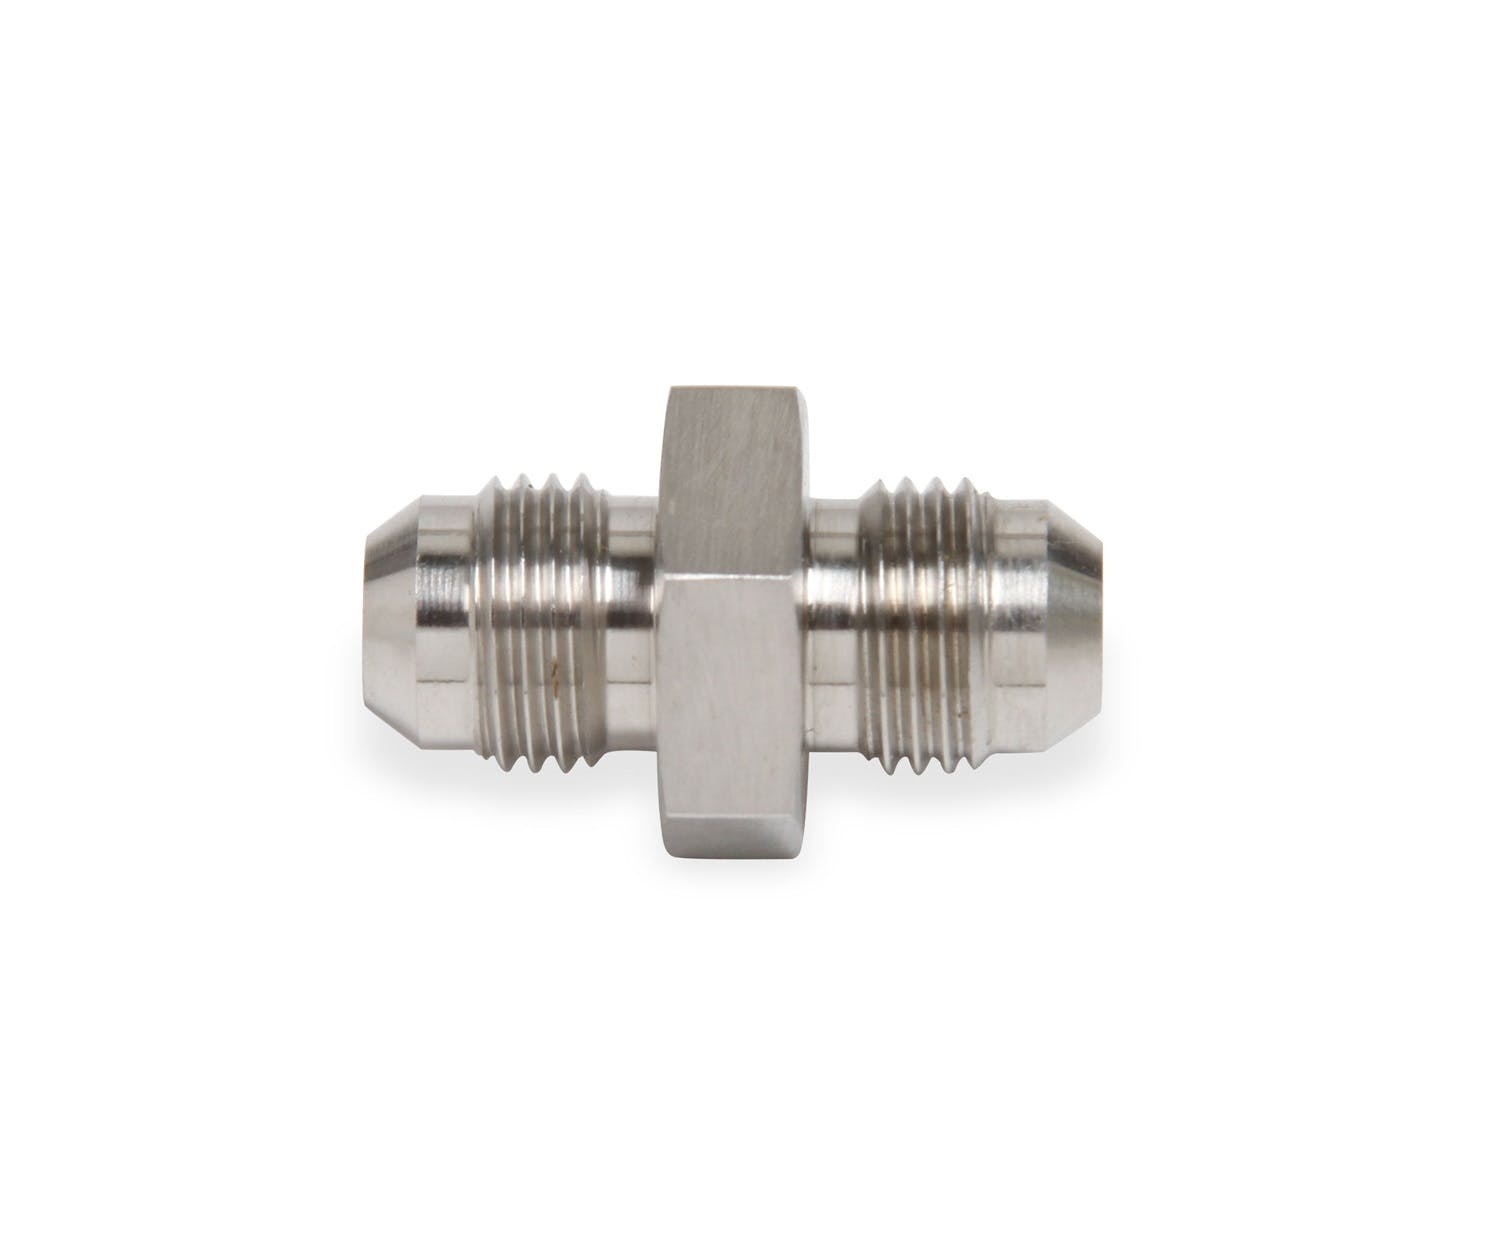 Earl's Performance Plumbing SS981512ERL -12 UNION STAINLESS STEEL